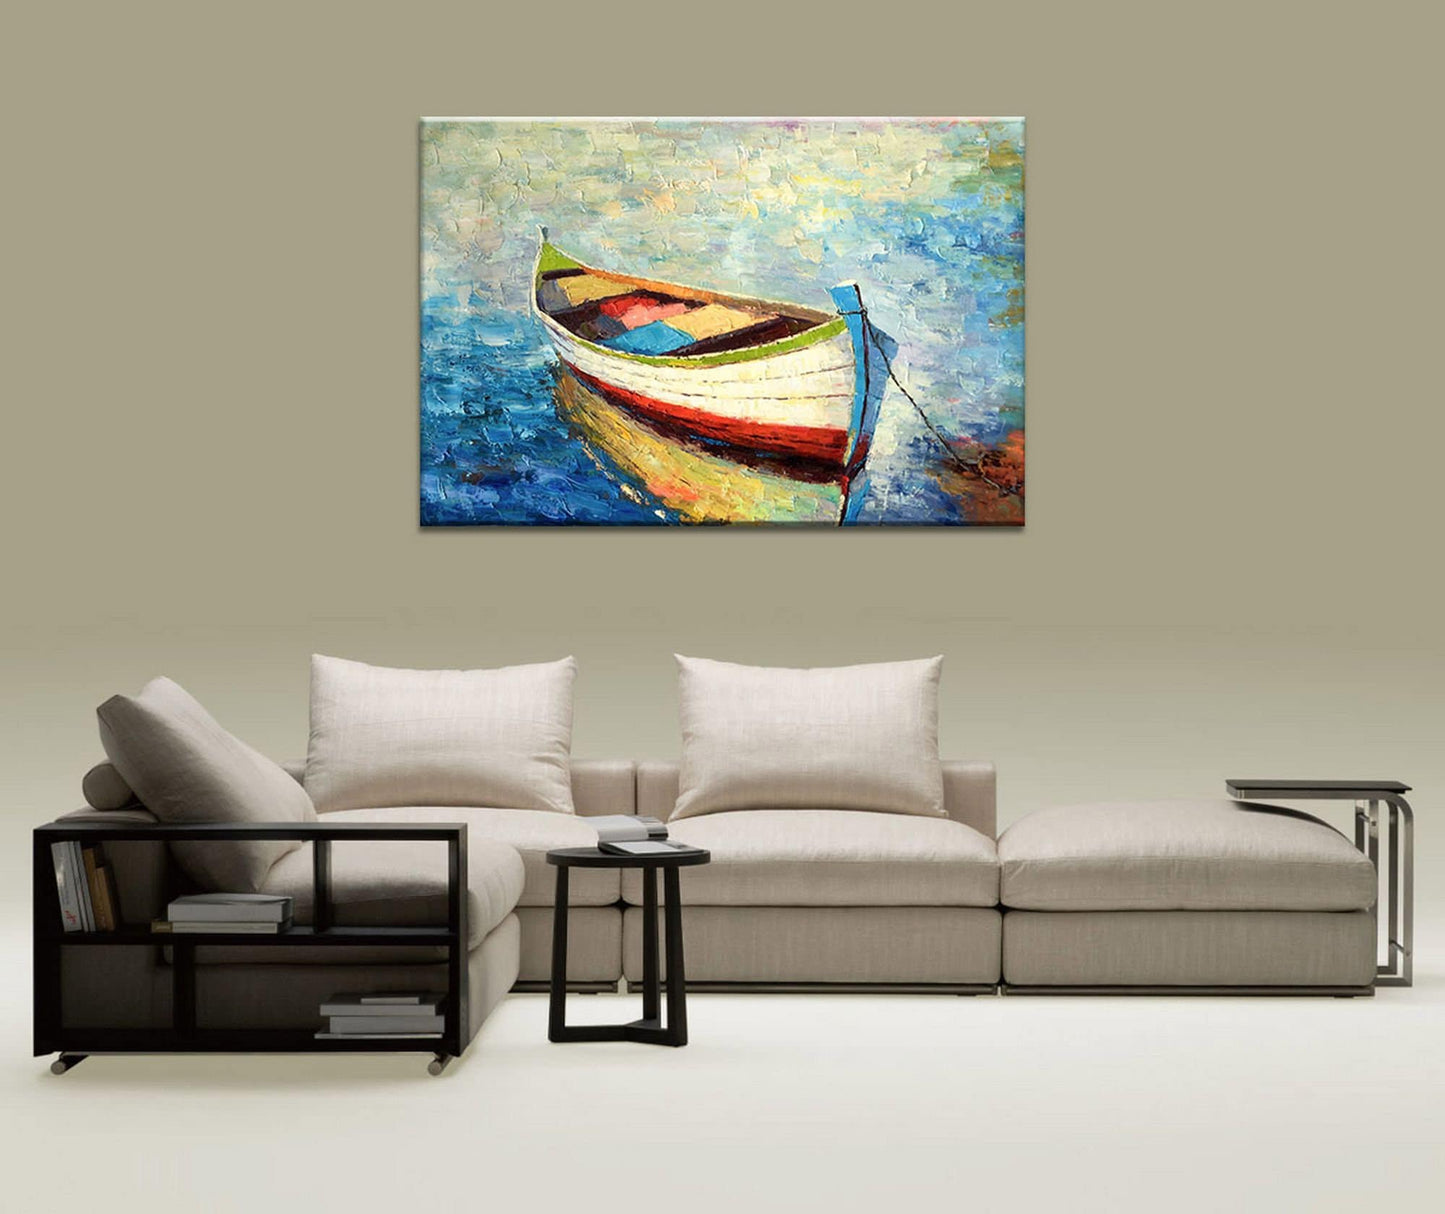 Large Oil Painting Fishing Boat Seascape Bedroom Decor, Aesthetic Room Decor, Unique Wall Art, Canvas Wall Art Abstract, Oil Painting Blue